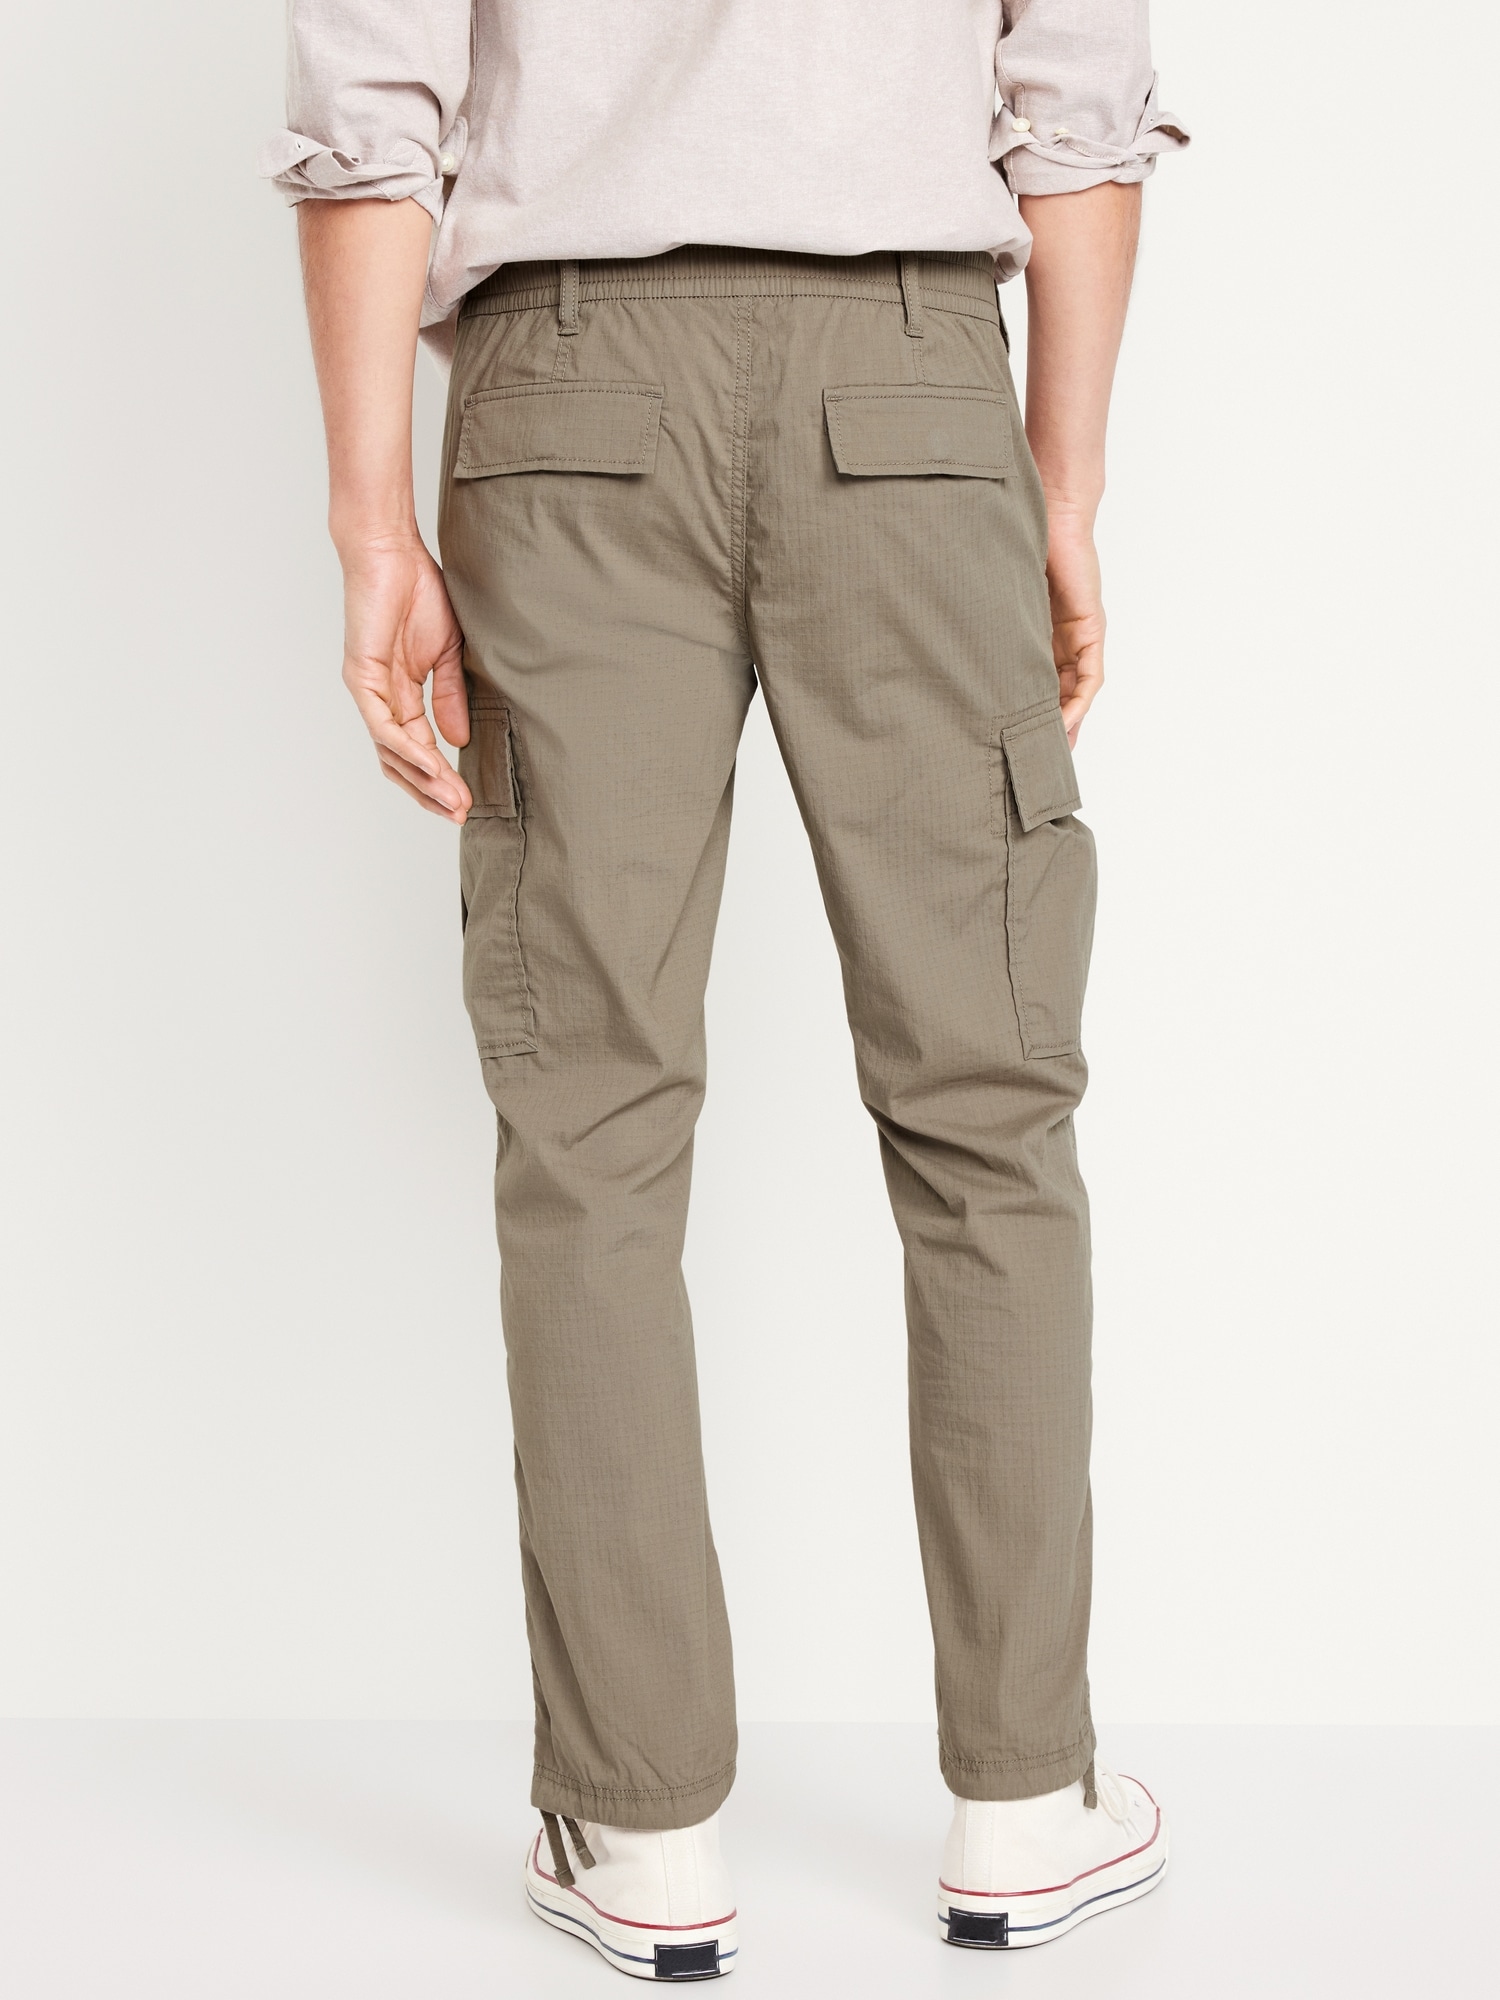 Old Navy Men's Straight Ripstop Cargo Pants - - Size XL